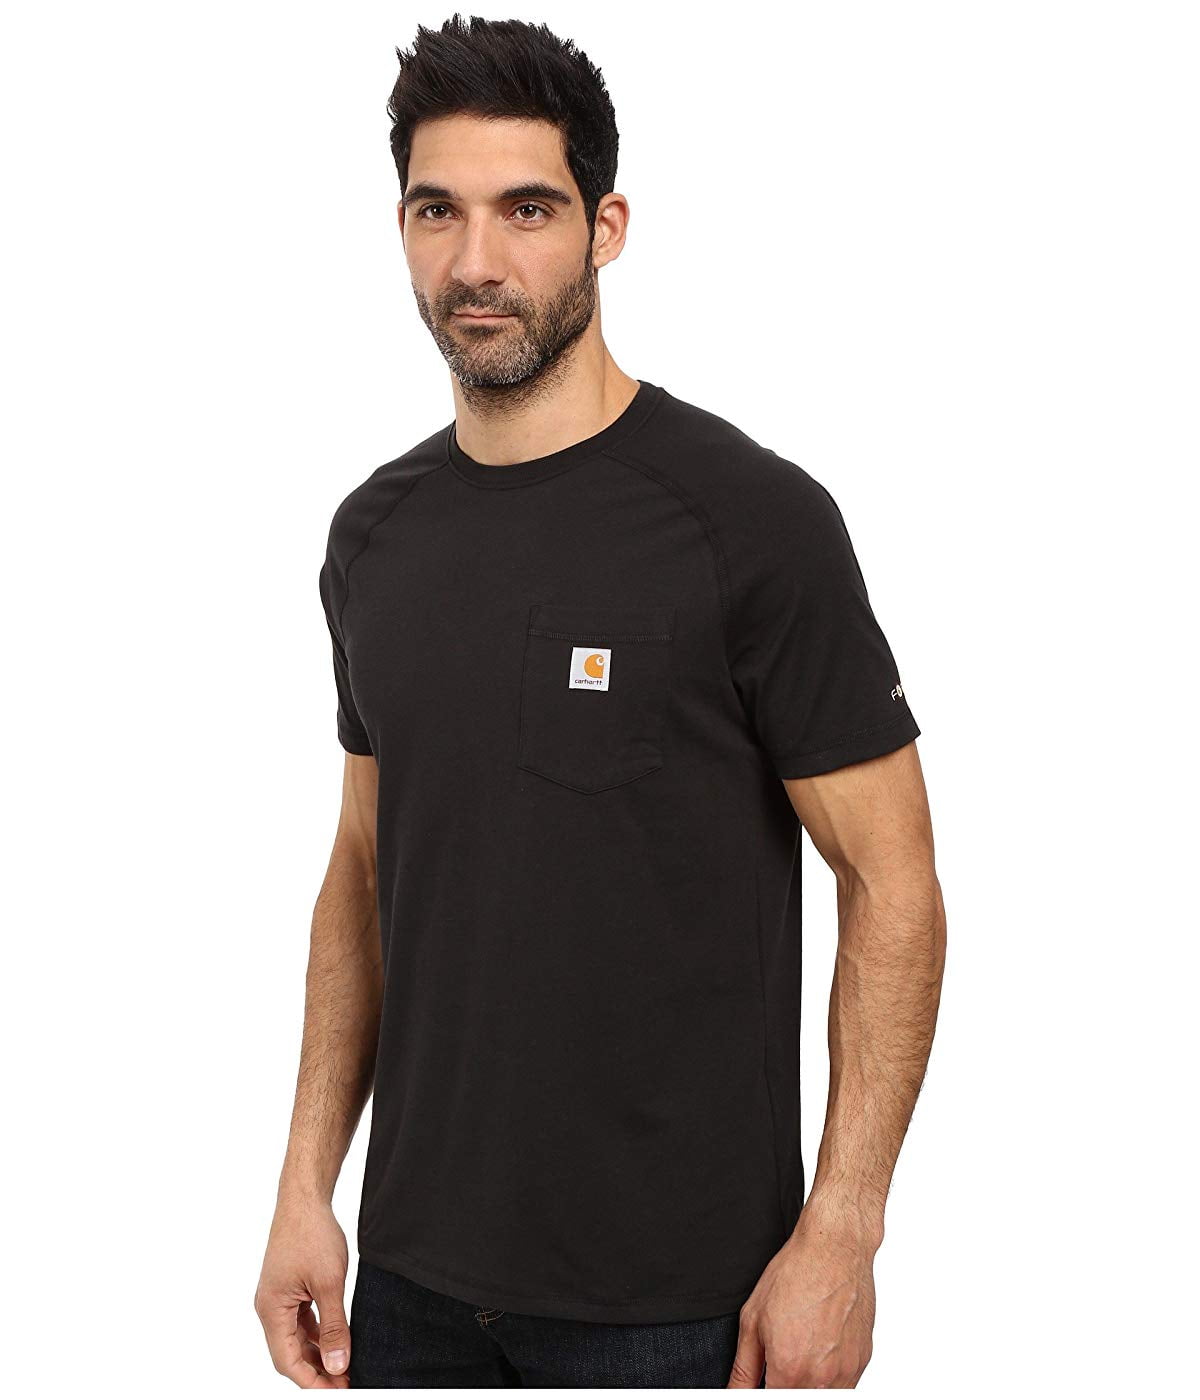 CARHARTT FORCE DELMONT COTTON S/S T-SHIRT IN BLACK  SIZE 3XL    NEW